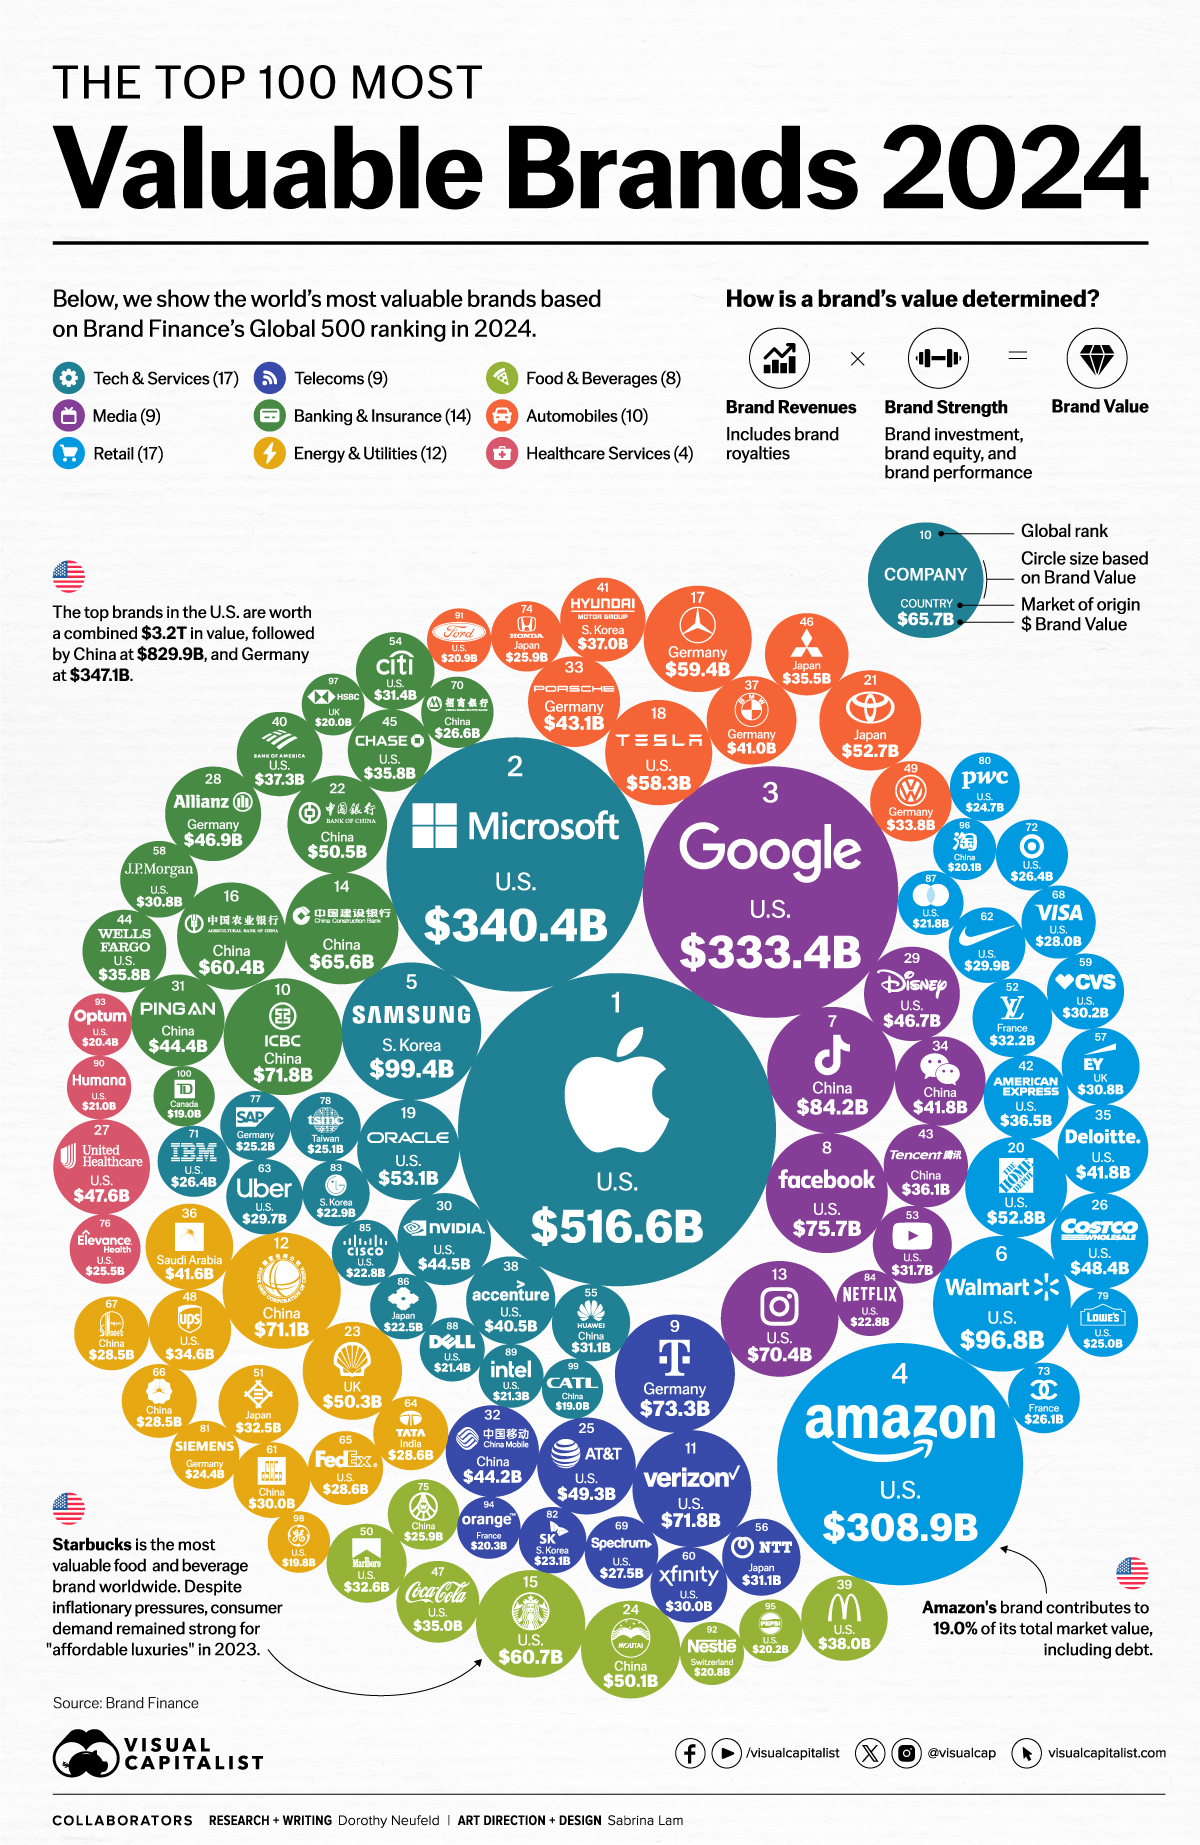 The Top 100 Most Valuable Brands in 2024